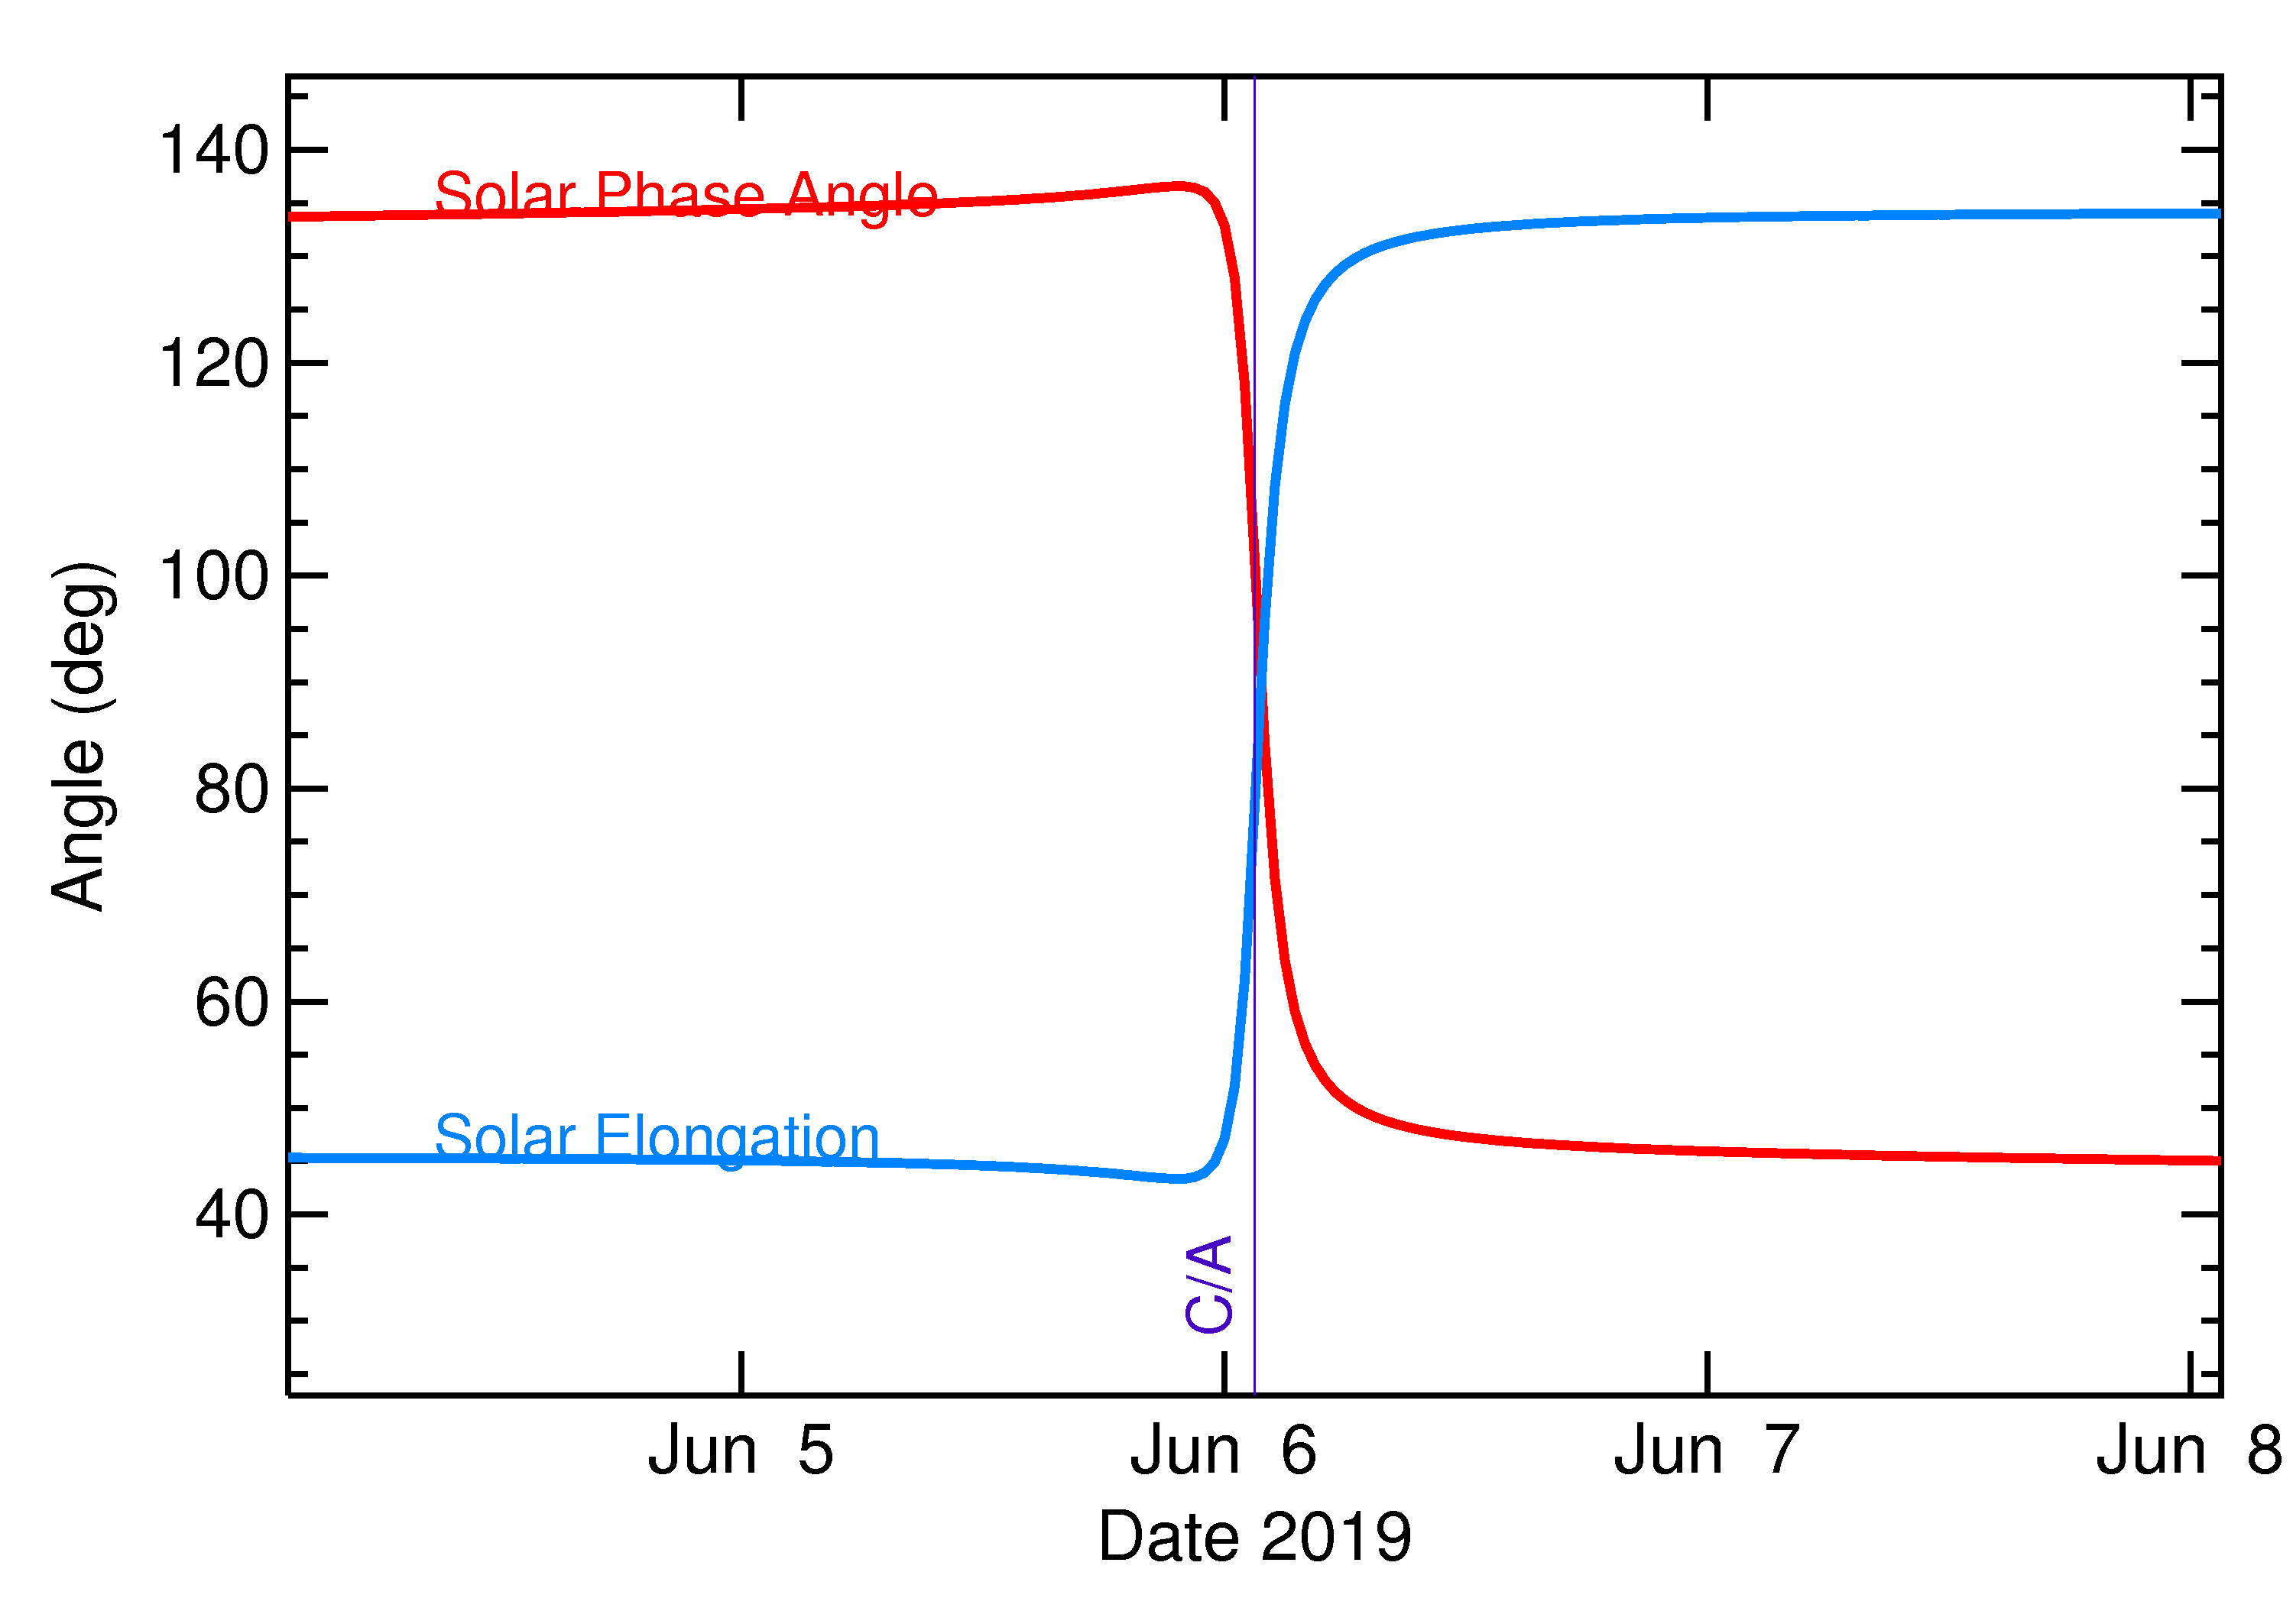 Solar Elongation and Solar Phase Angle of 2019 LY4 in the days around closest approach